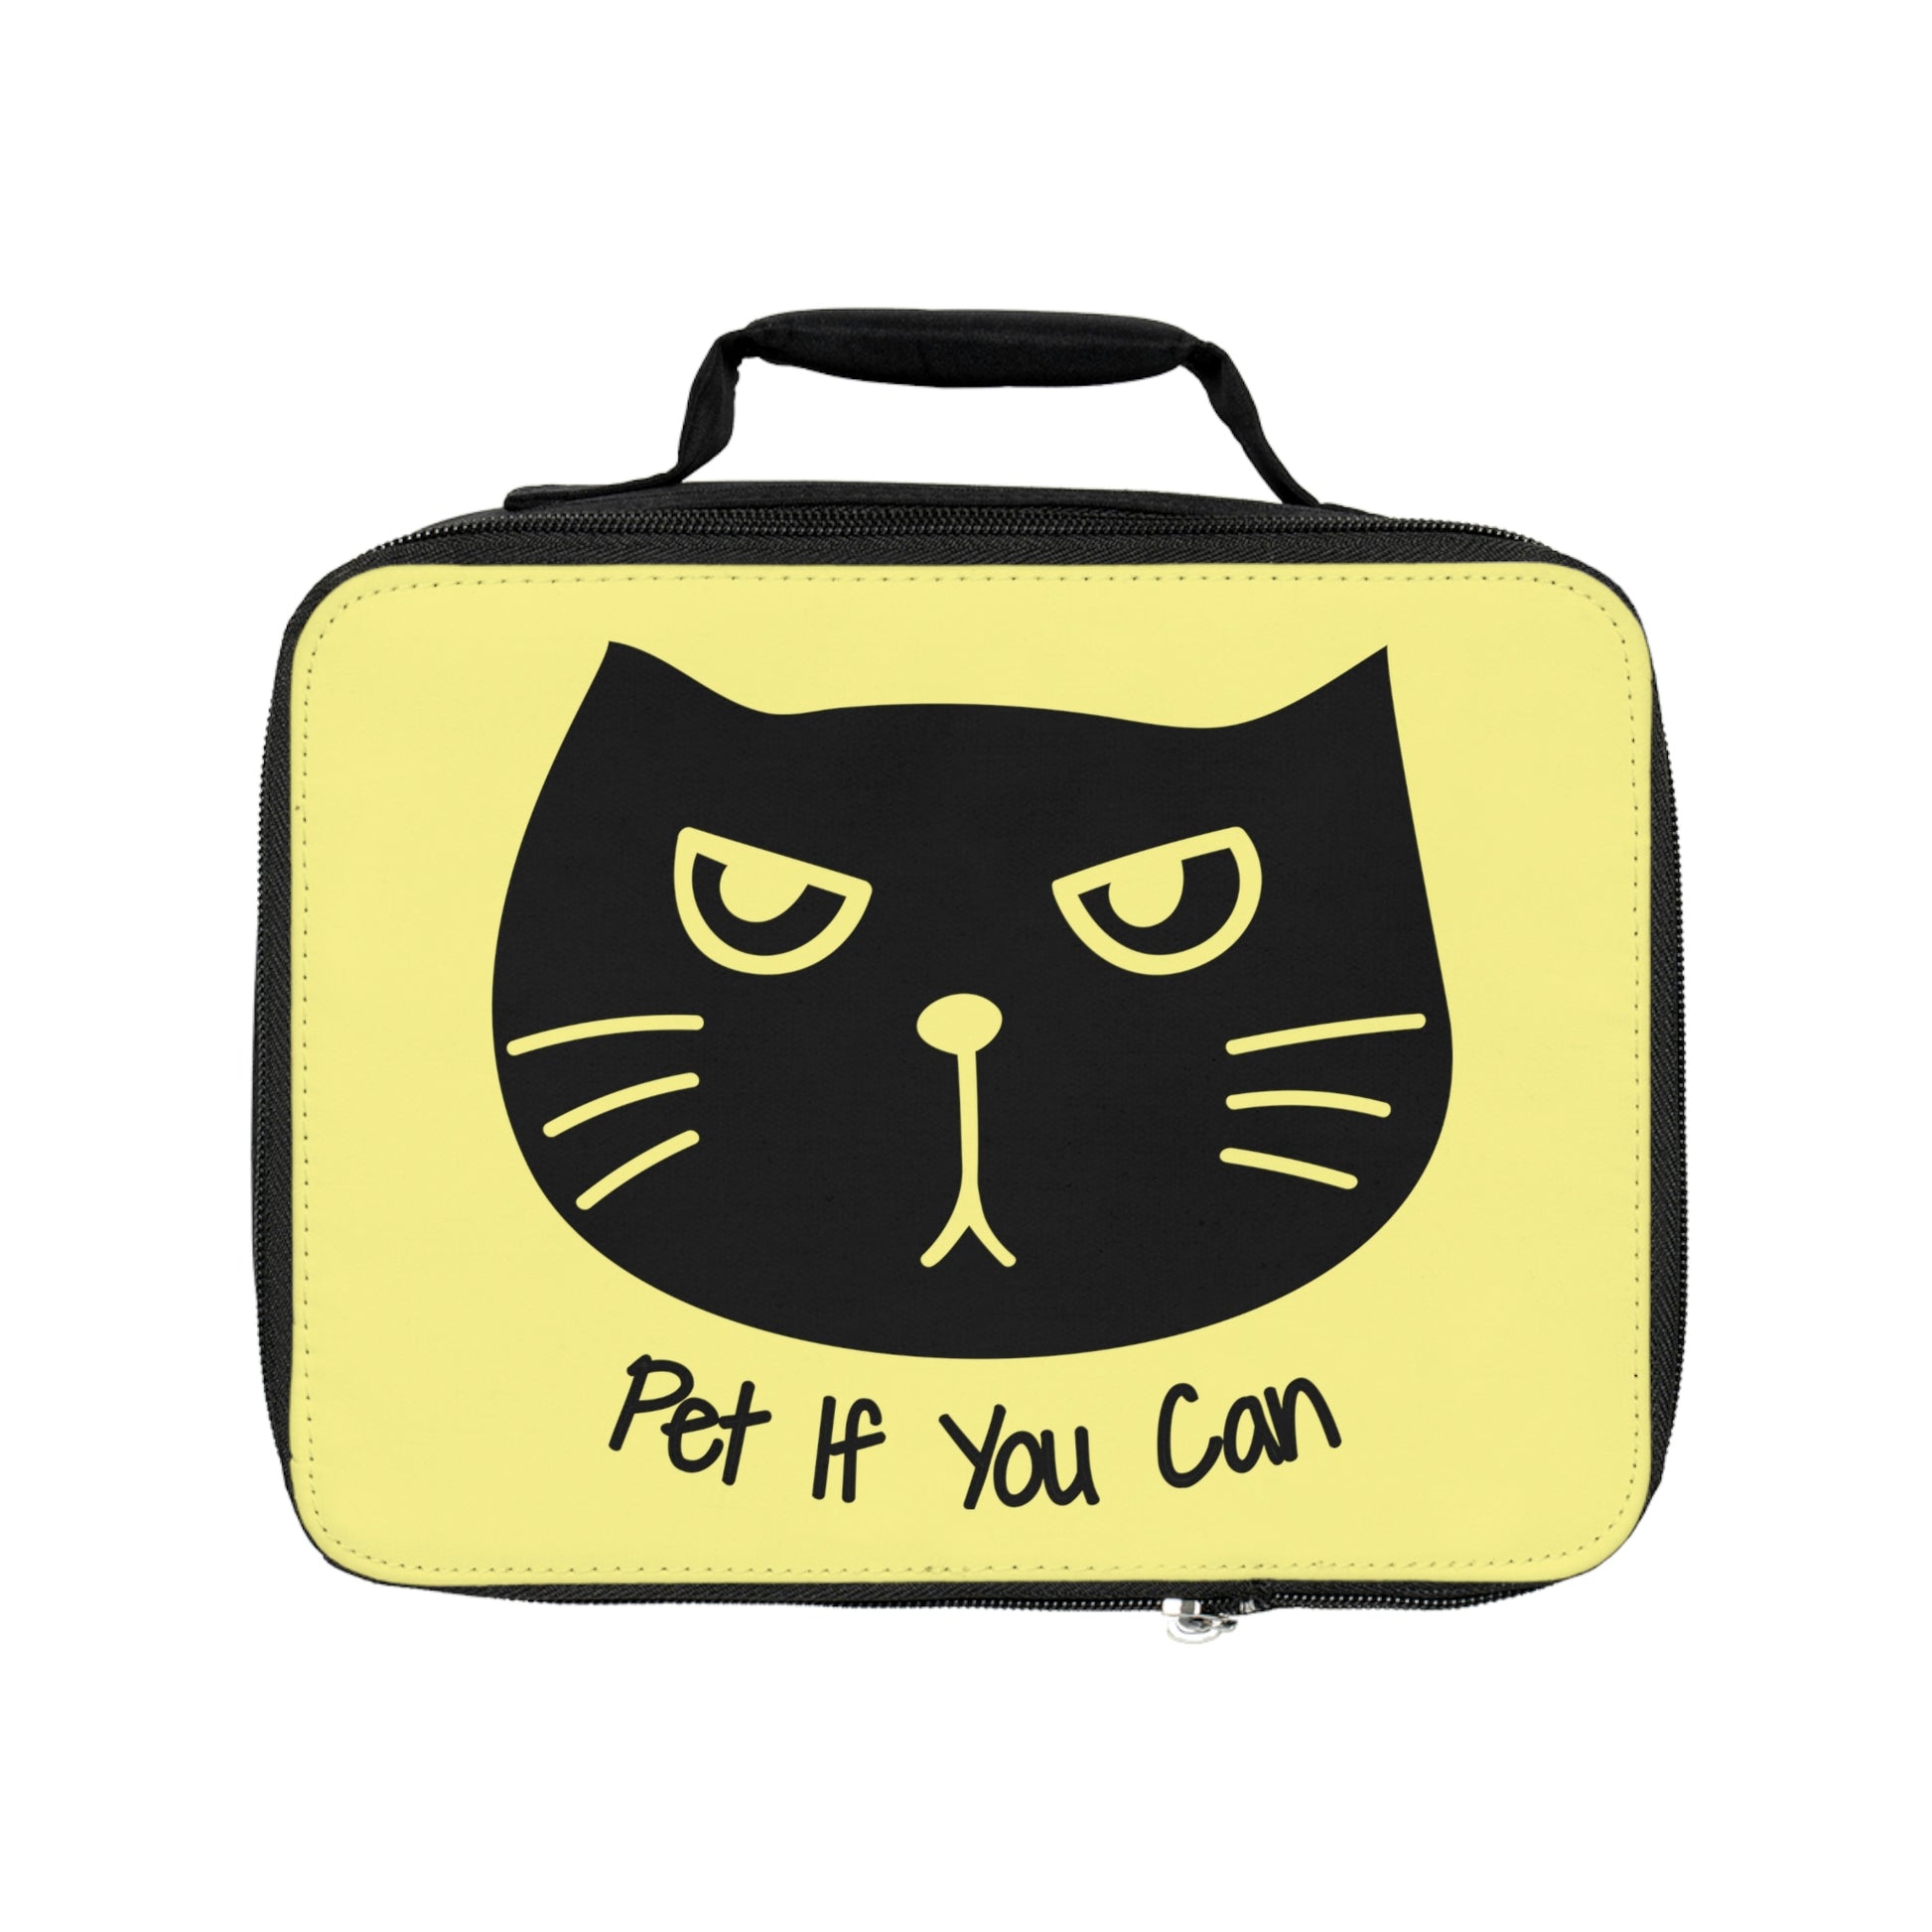 Funny cat lunch bag, Black cat says pet if you can Lunch tote, cute yellow Lunch Bag, kawaii picnic bag, back to school gift for cat lovers